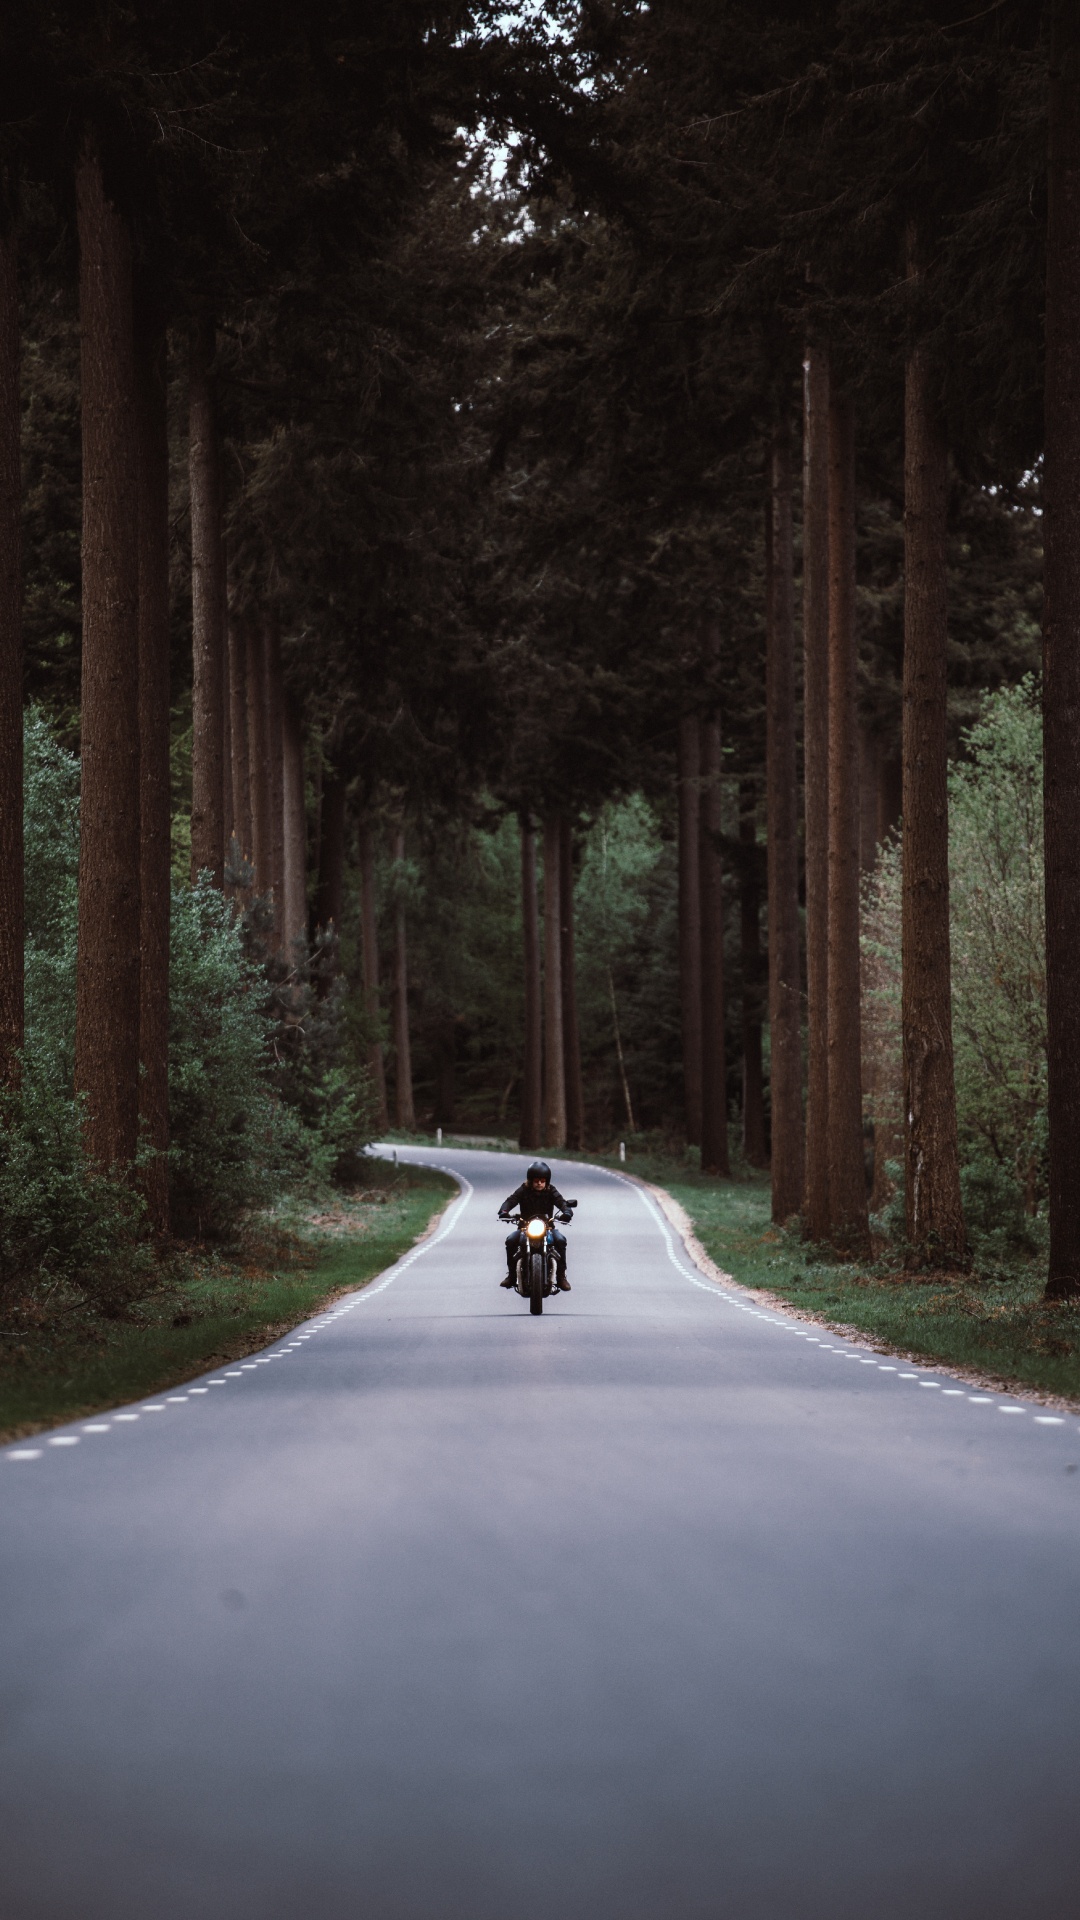 Person Riding Motorcycle on Road Between Trees During Daytime. Wallpaper in 1080x1920 Resolution